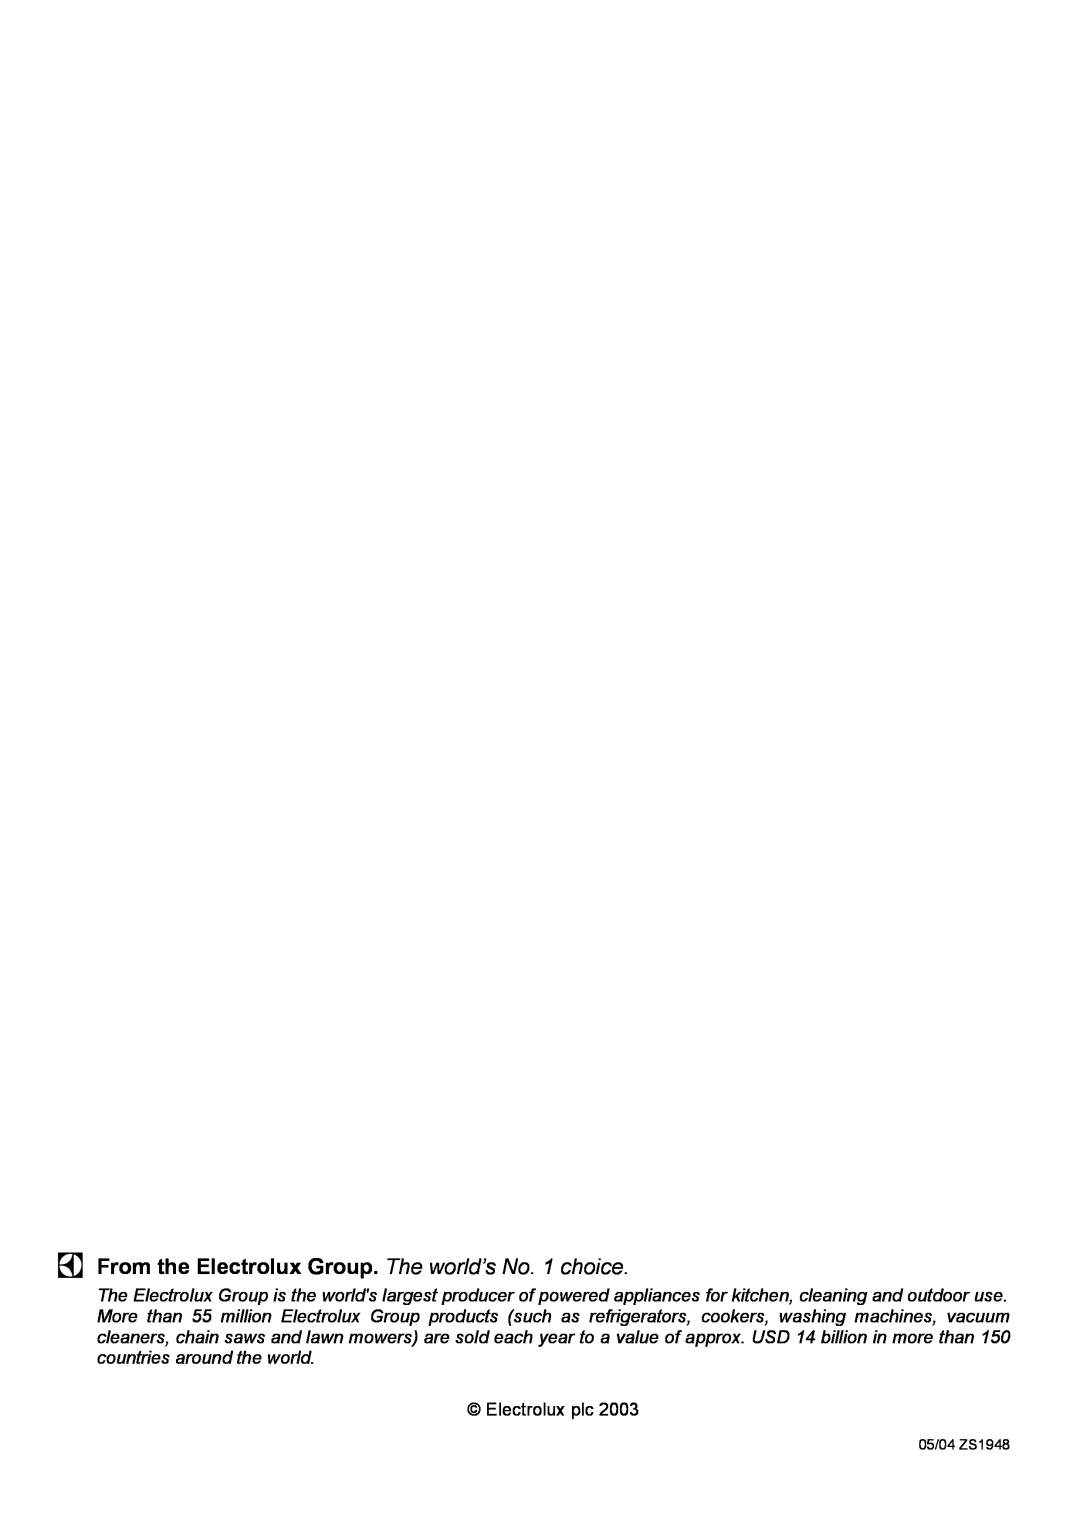 Electrolux C41022G manual From the Electrolux Group. The world’s No. 1 choice, Electrolux plc 